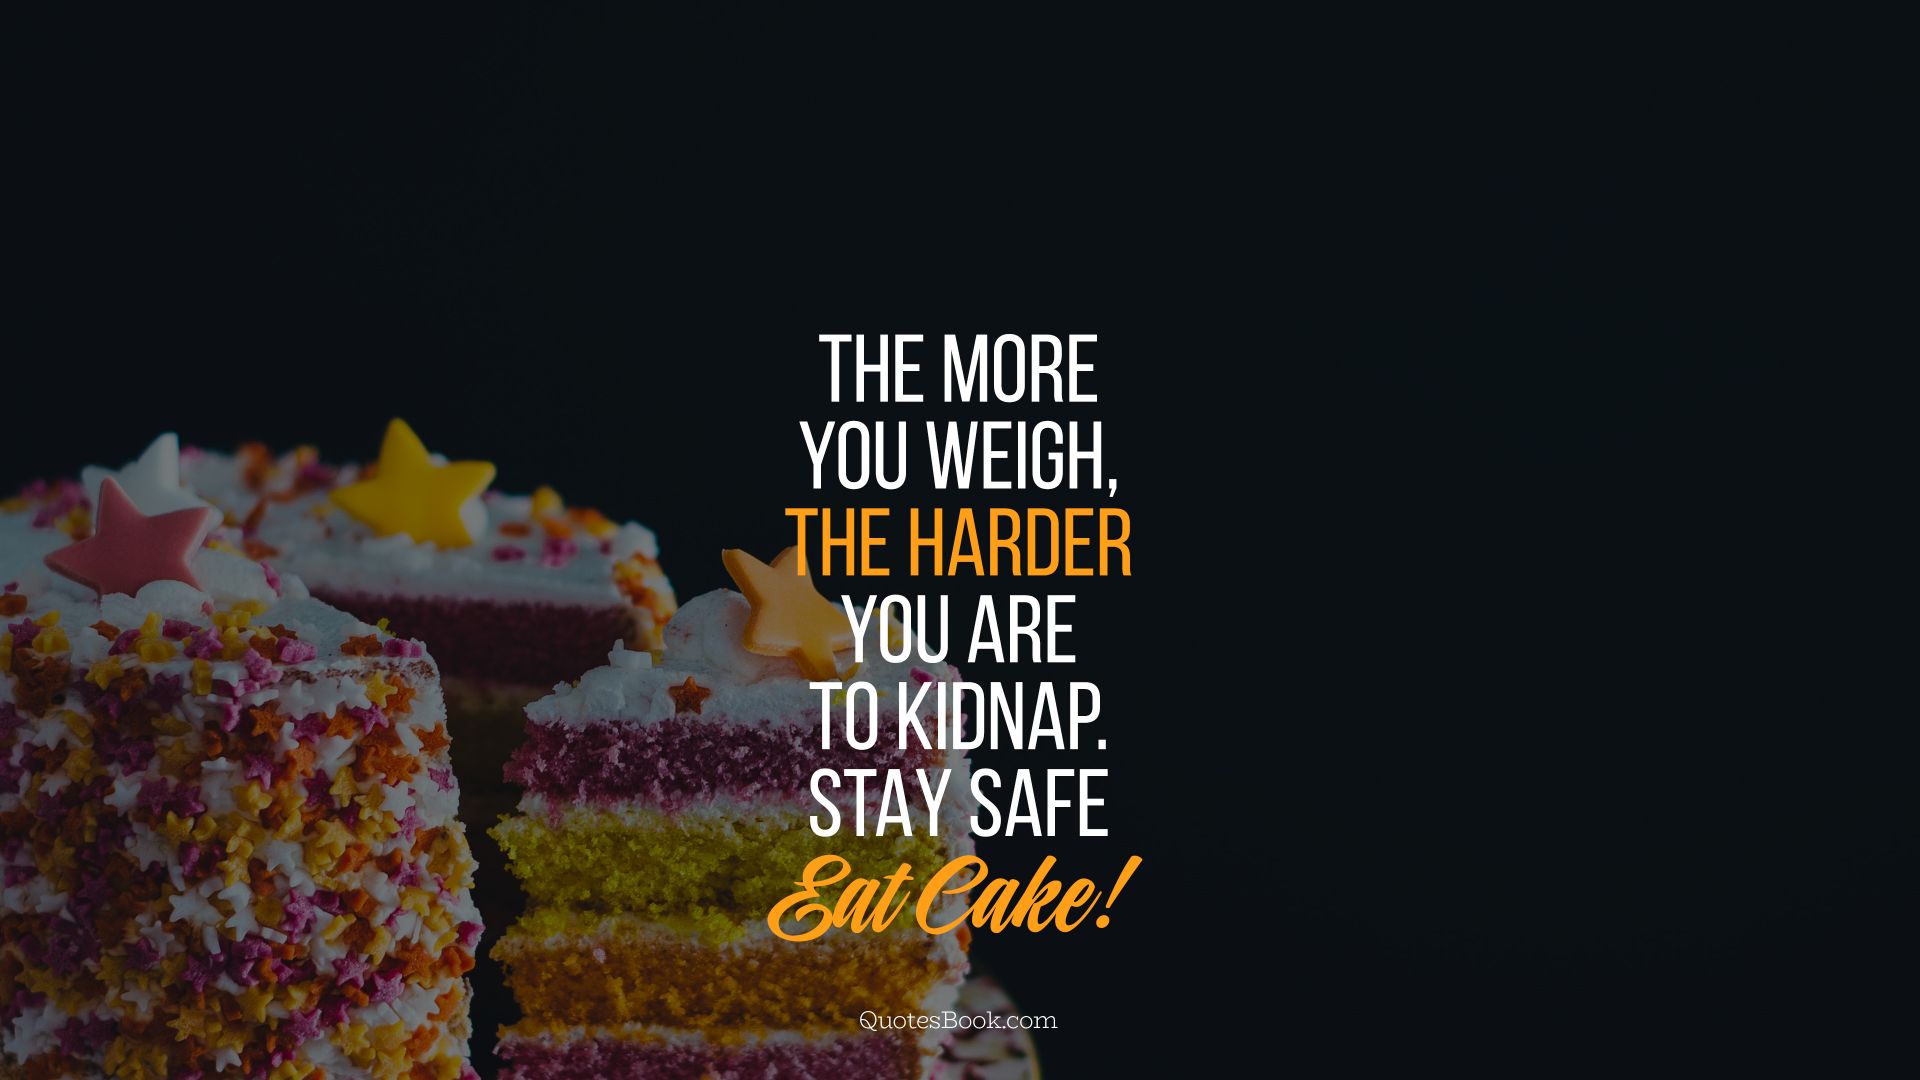 The more you weigh, the harder you are to kidnap. Stay safe eat cake!